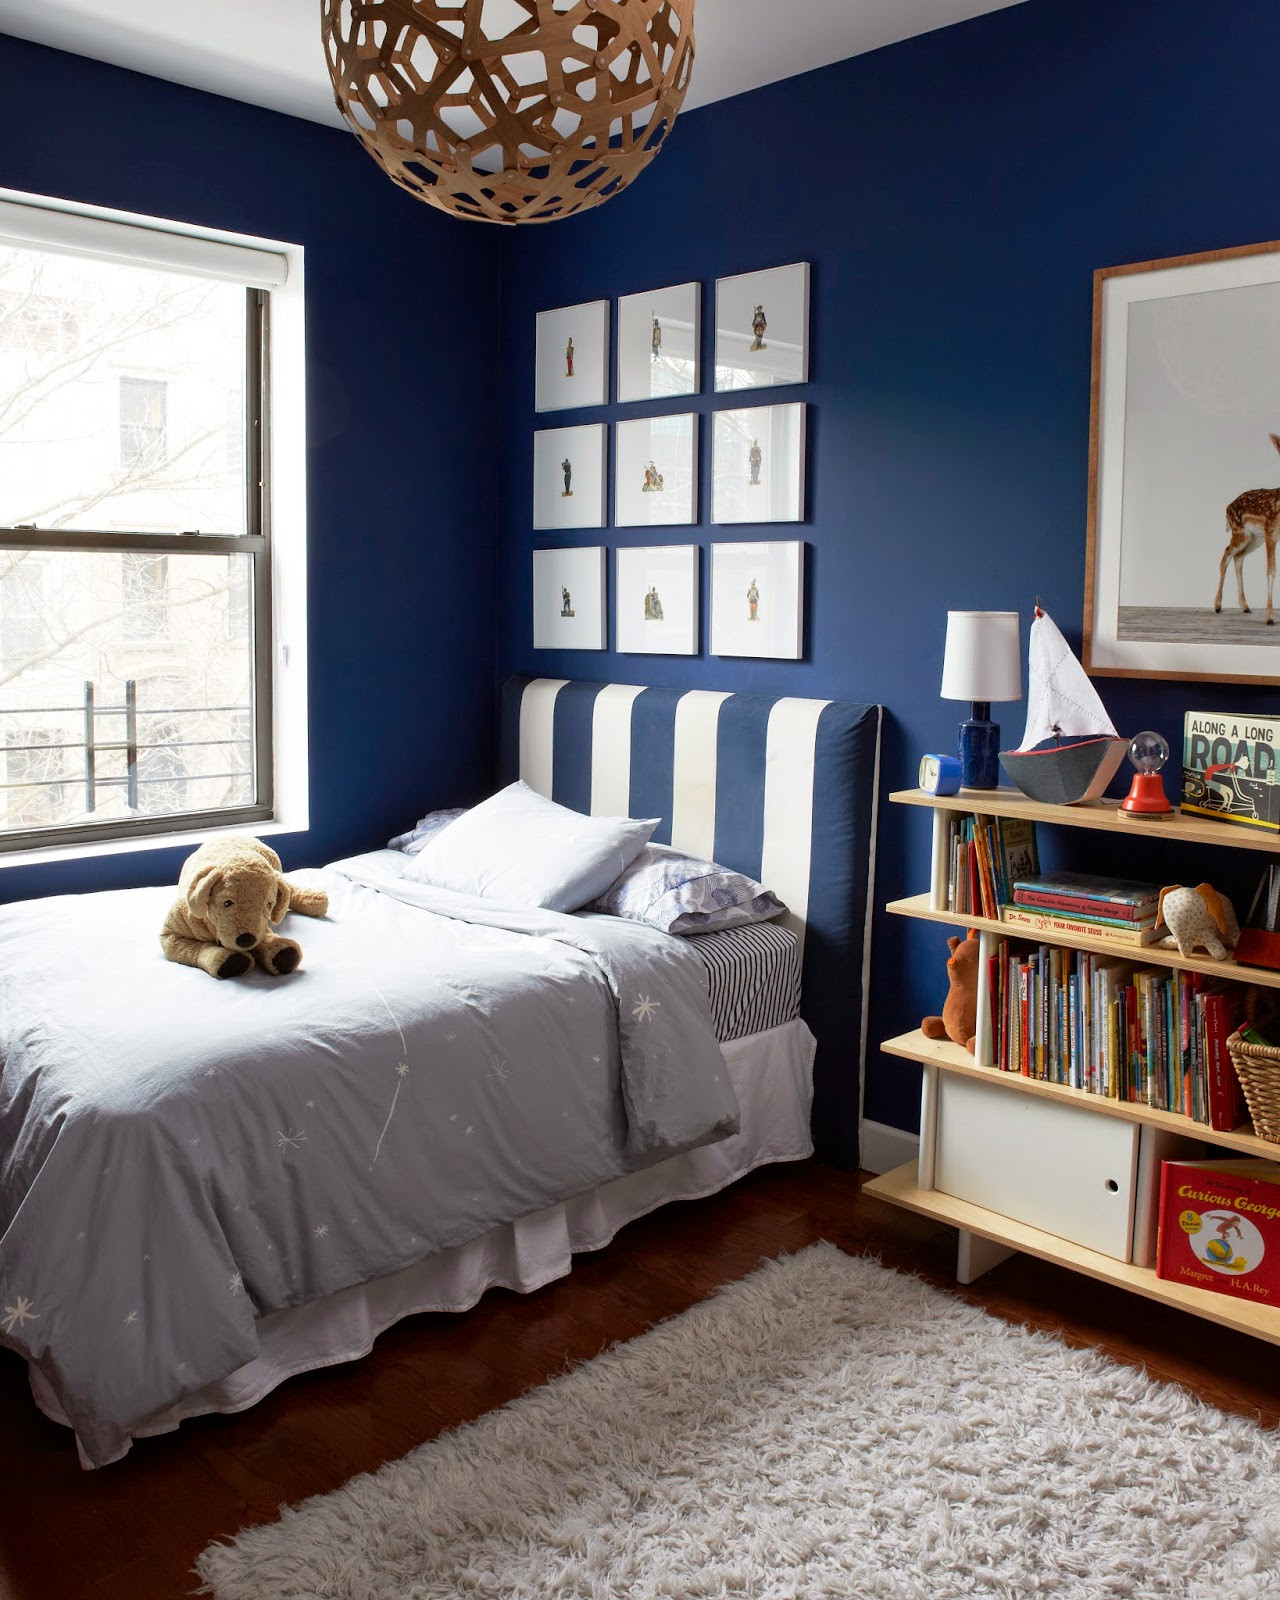 Bedroom Paint Colors
 Help Which Bedroom Paint Color Would You Choose